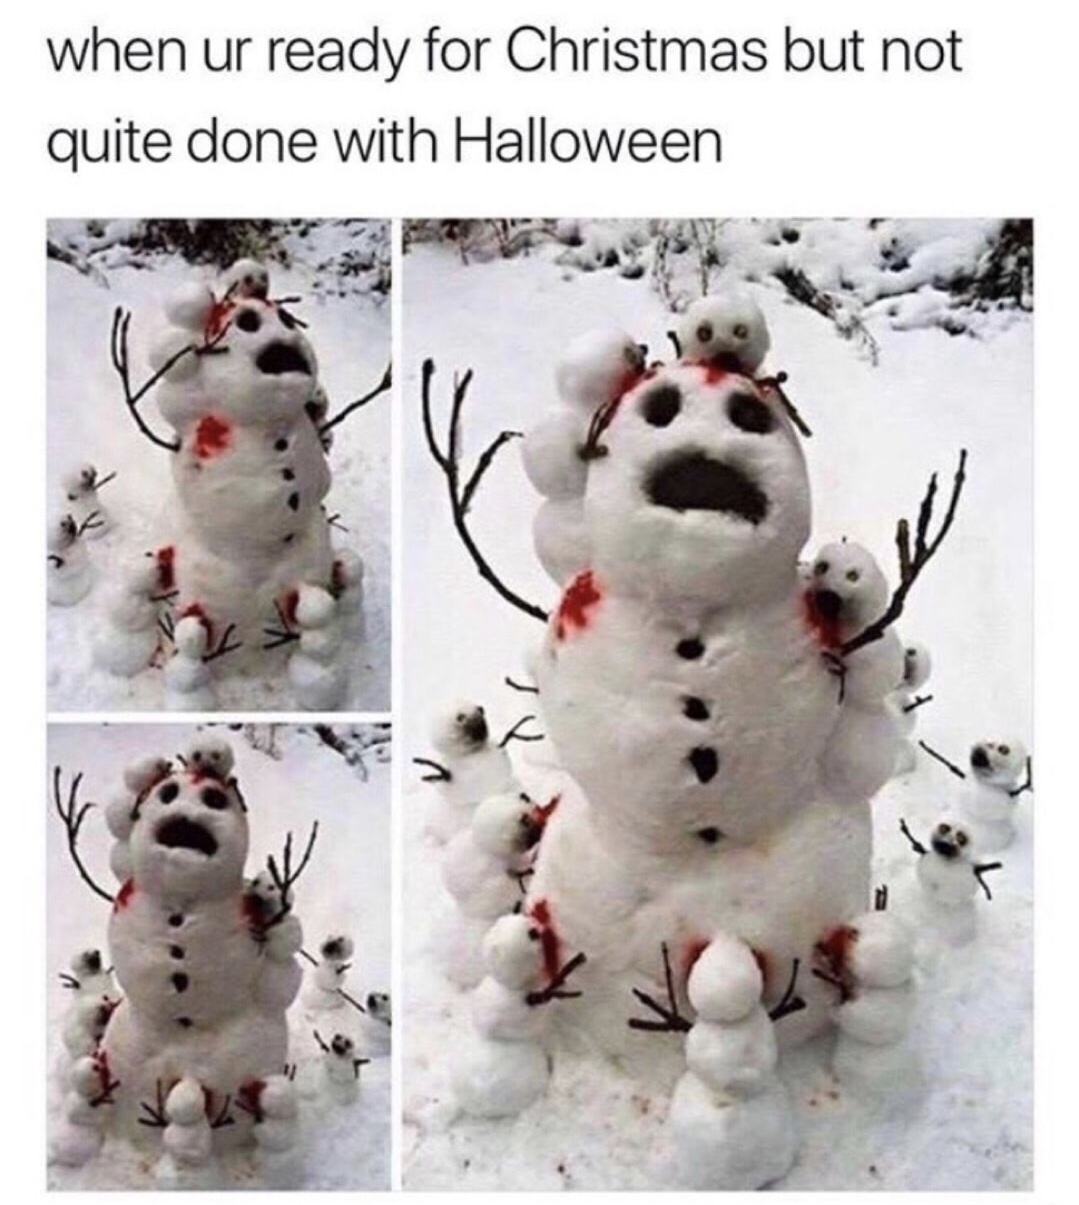 memes - snowman meme - when ur ready for Christmas but not quite done with Halloween